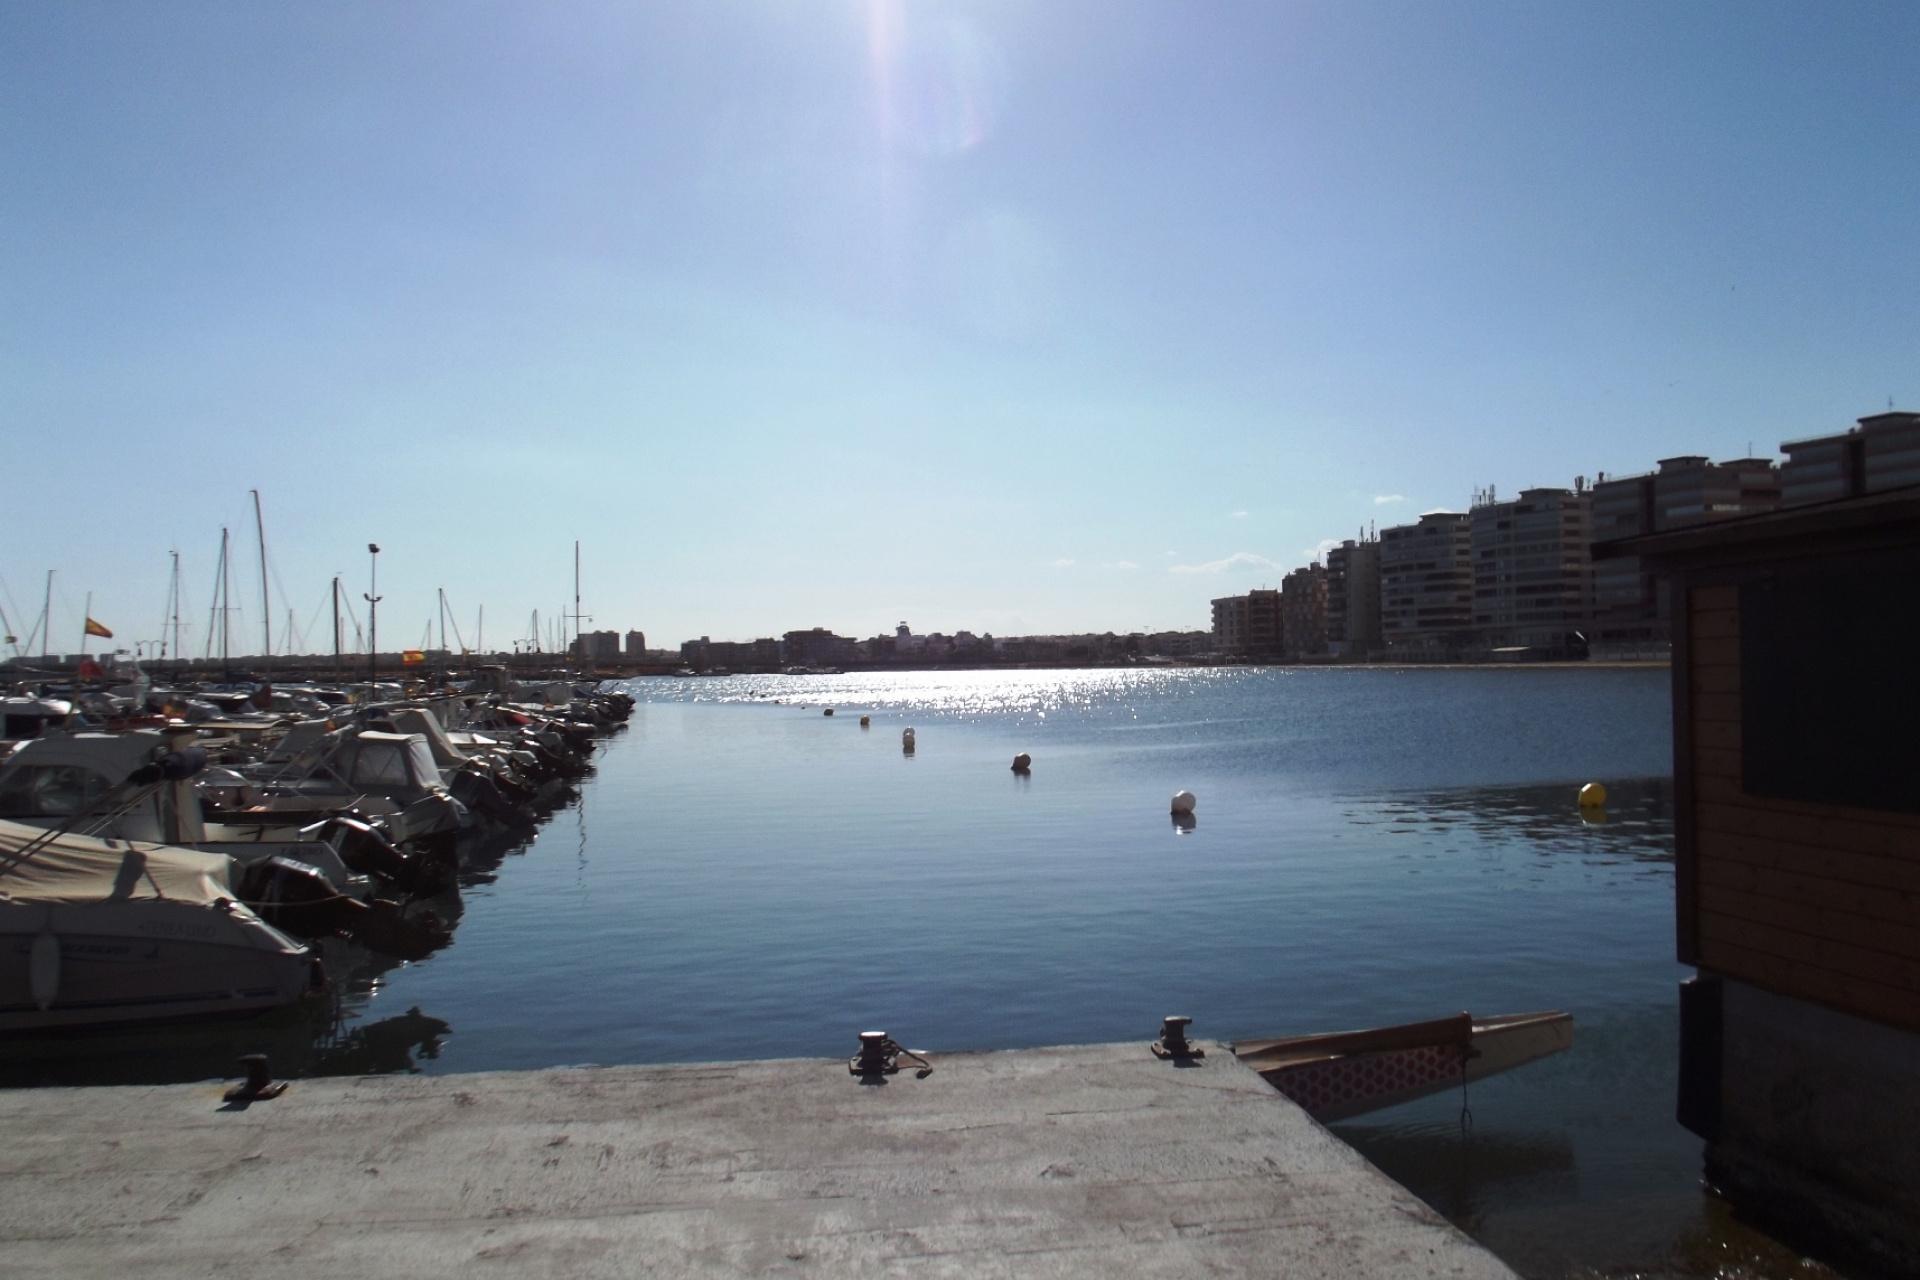 Archivado - Apartment for sale - Torrevieja - Torrevieja Town Centre